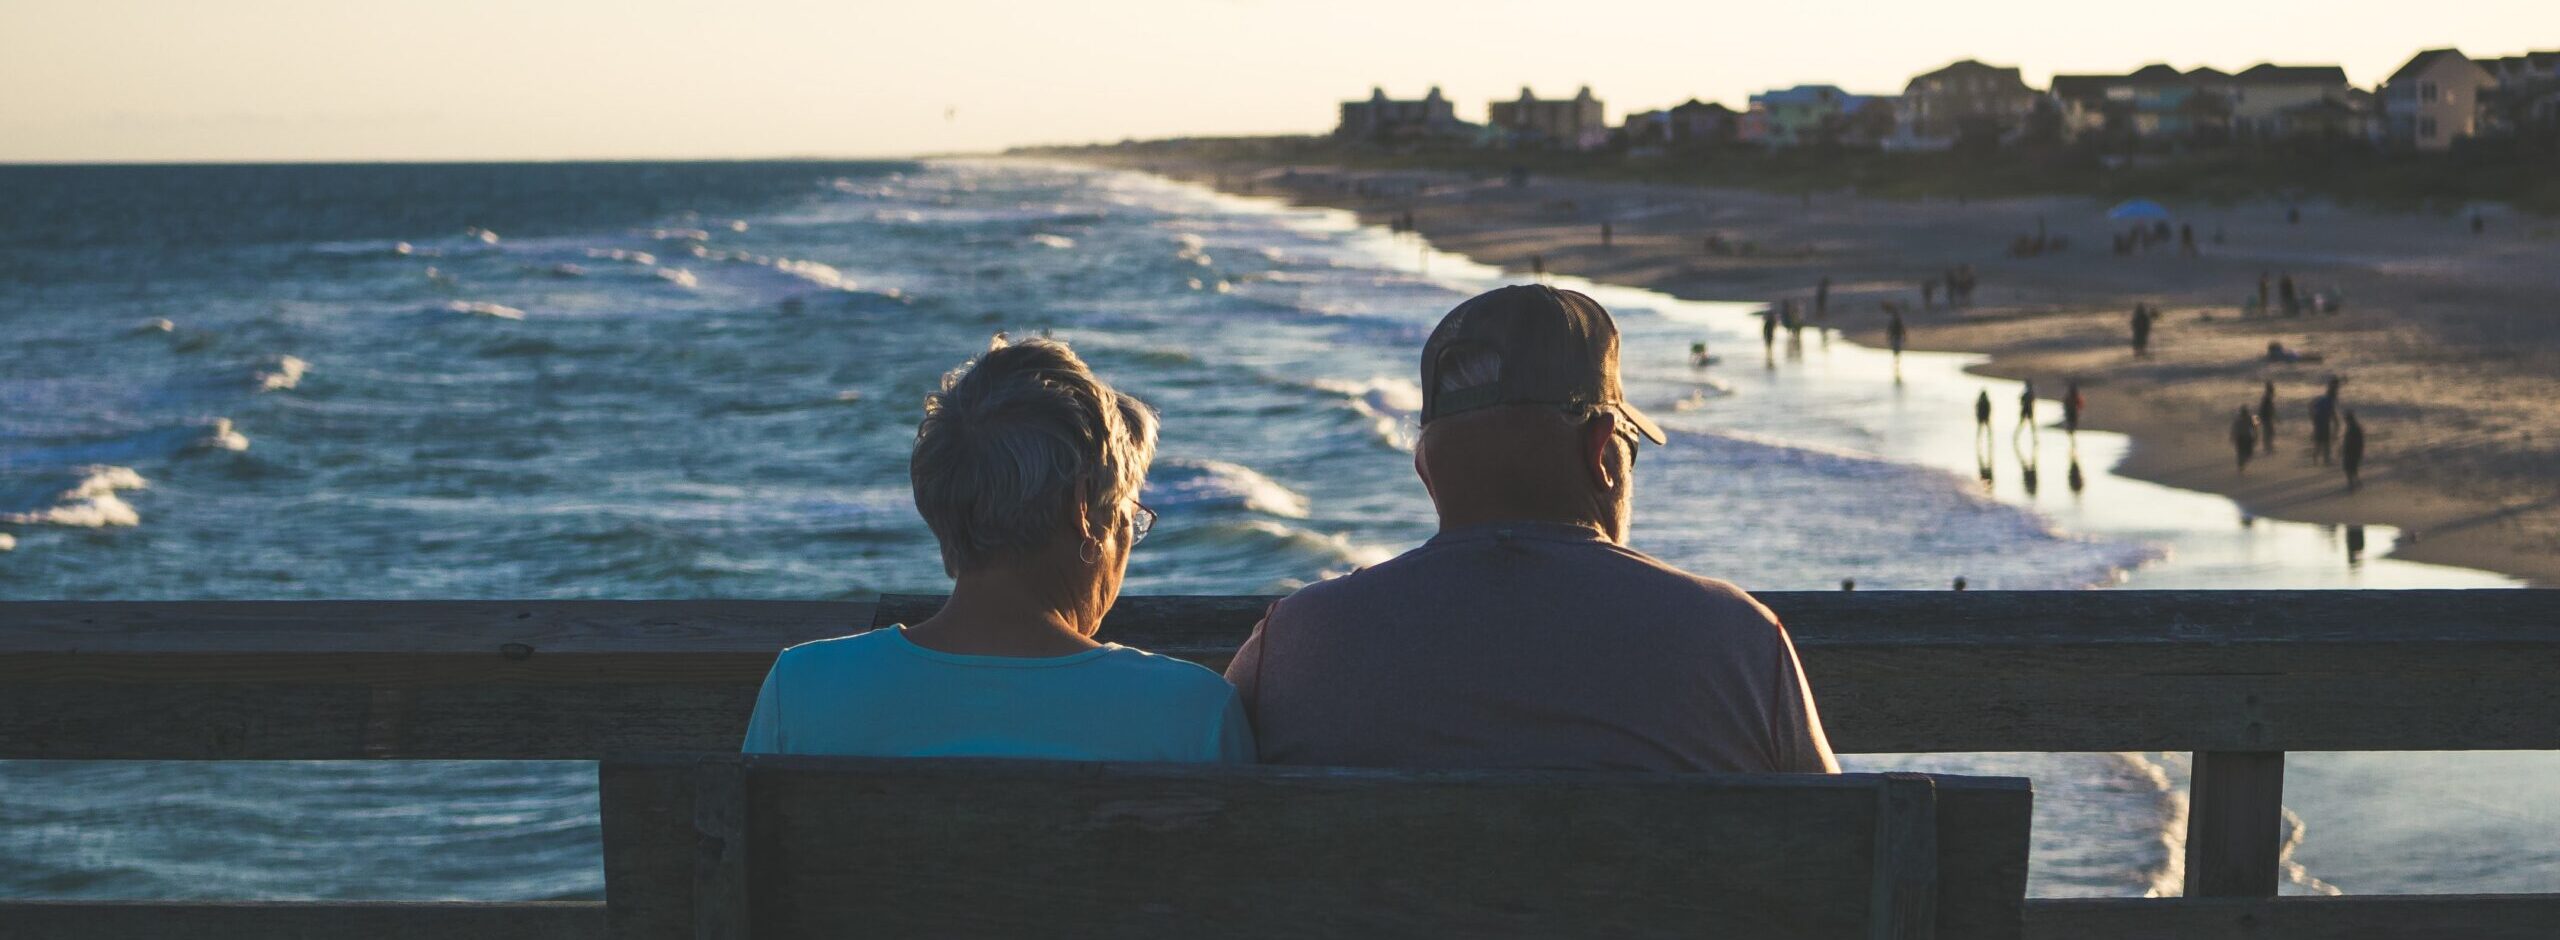 Elderly couple sitting on a bench on a pier